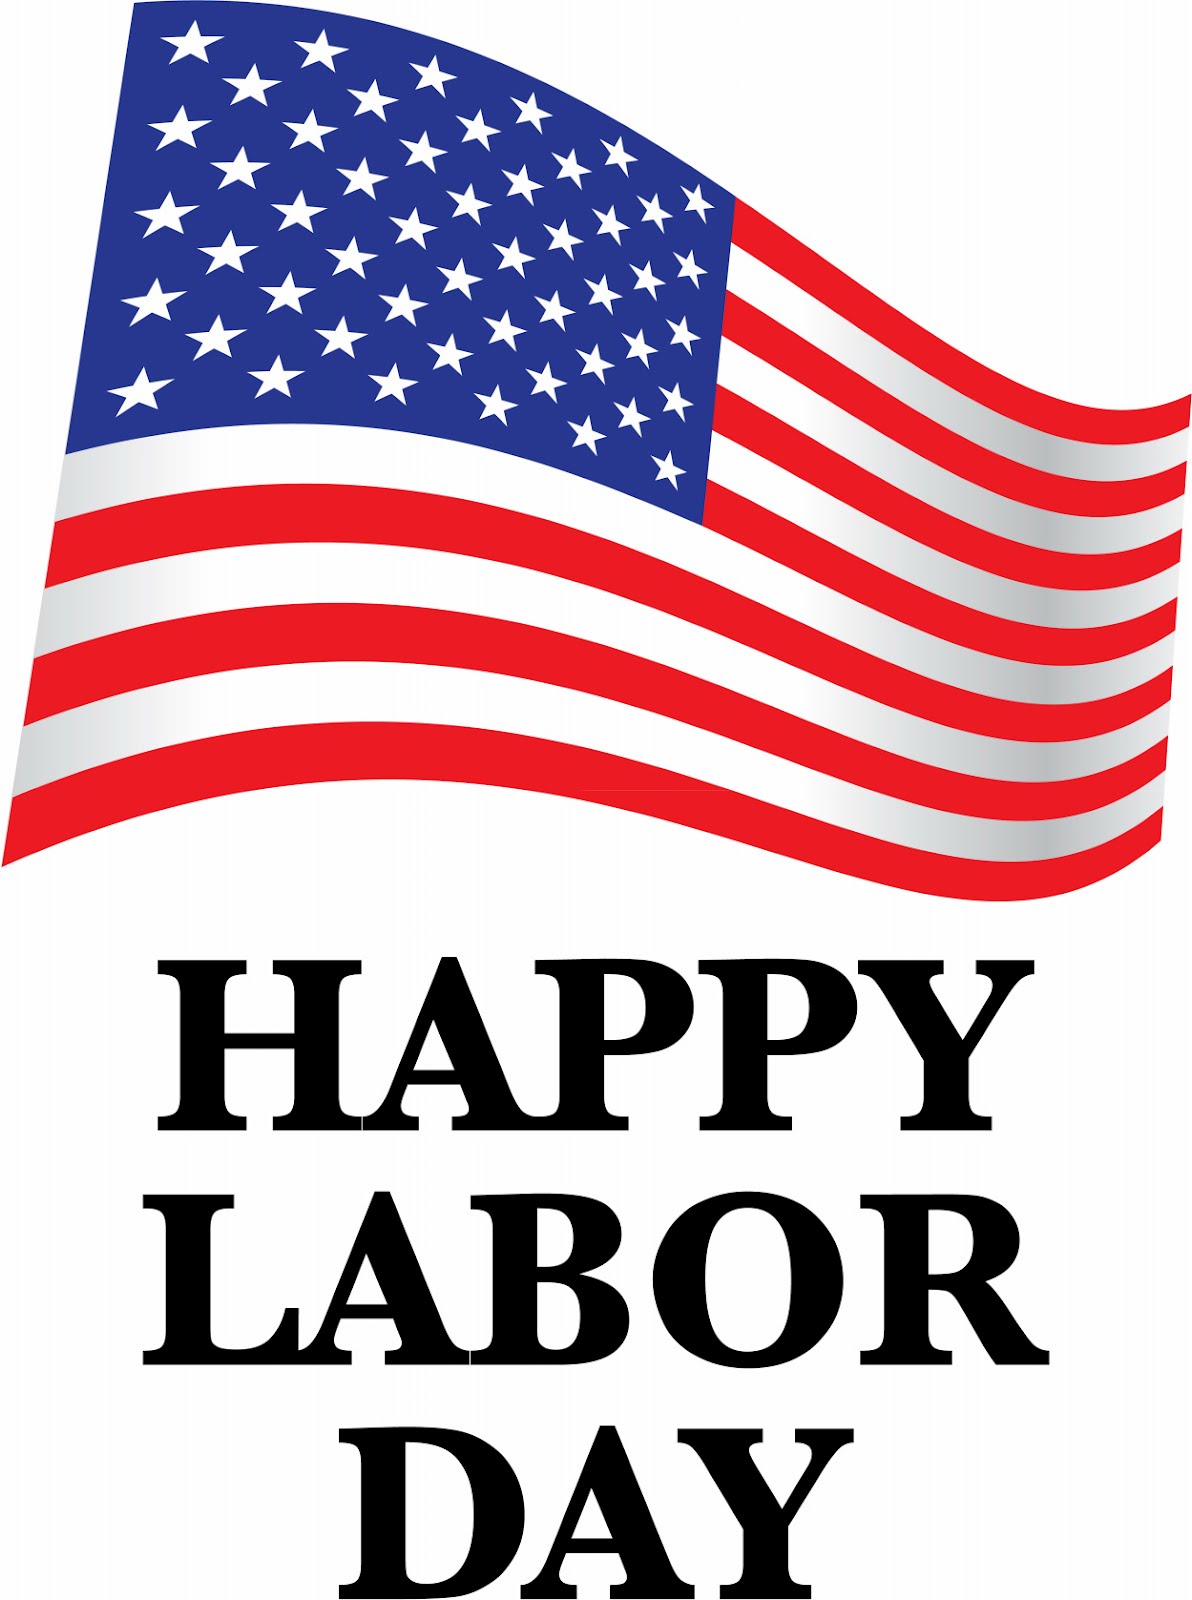 free clipart labor day holiday - photo #6